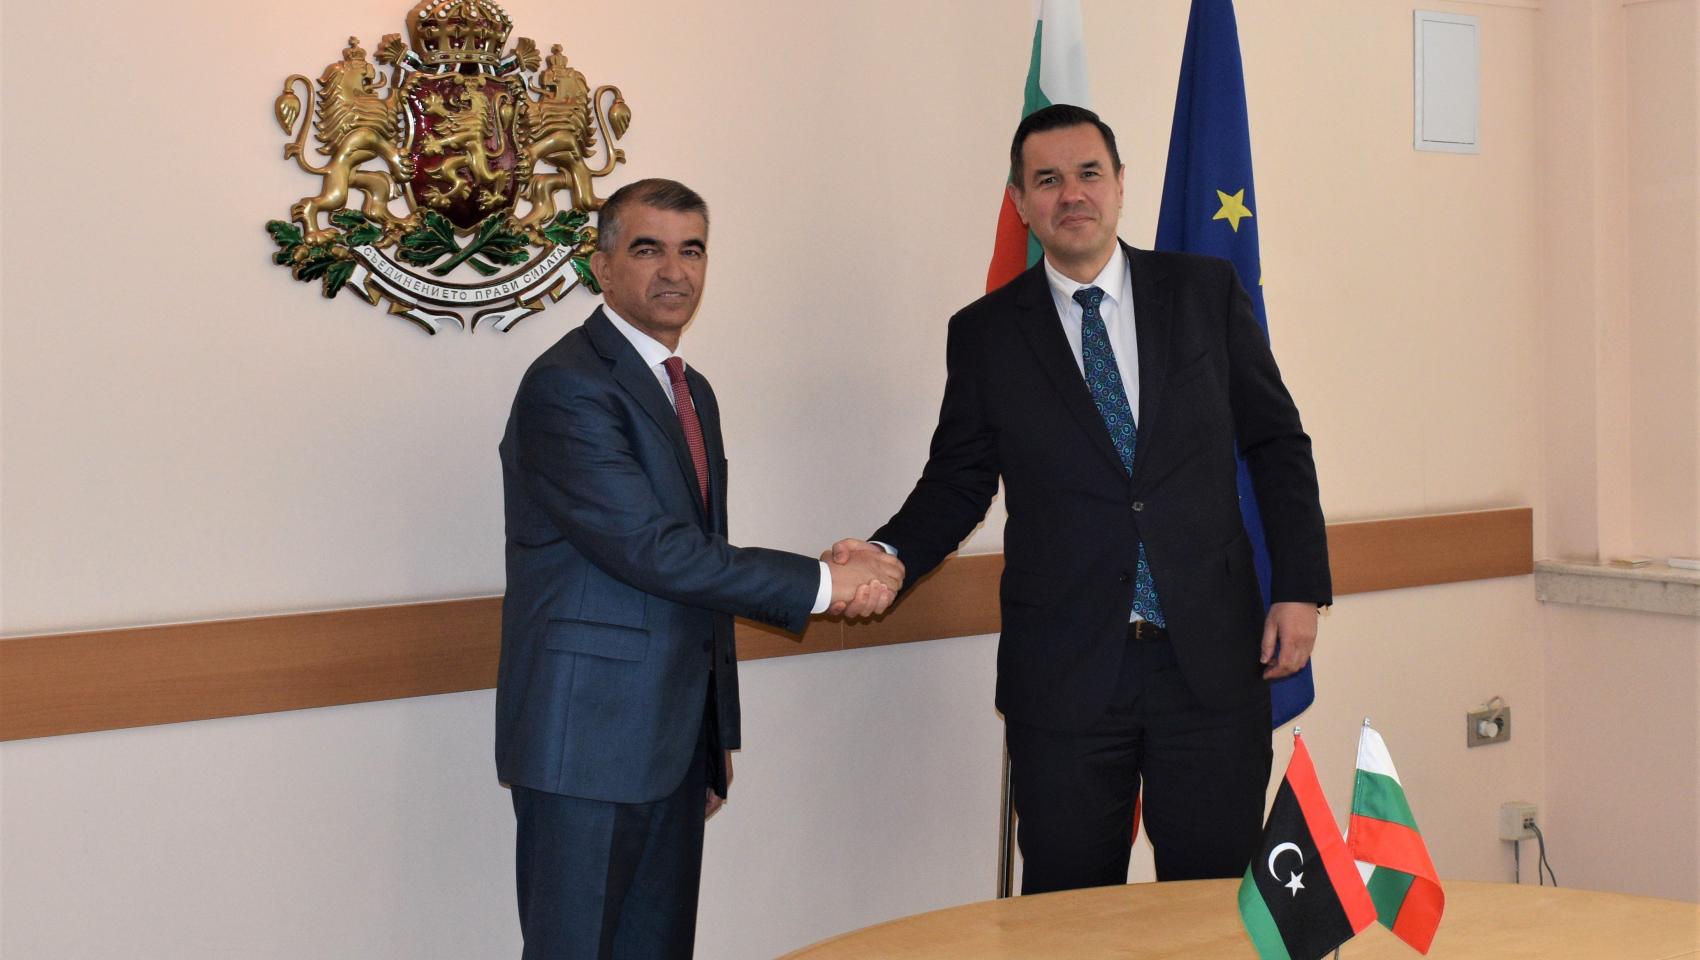 Bulgarian exports to Libya last year increased by over 40%